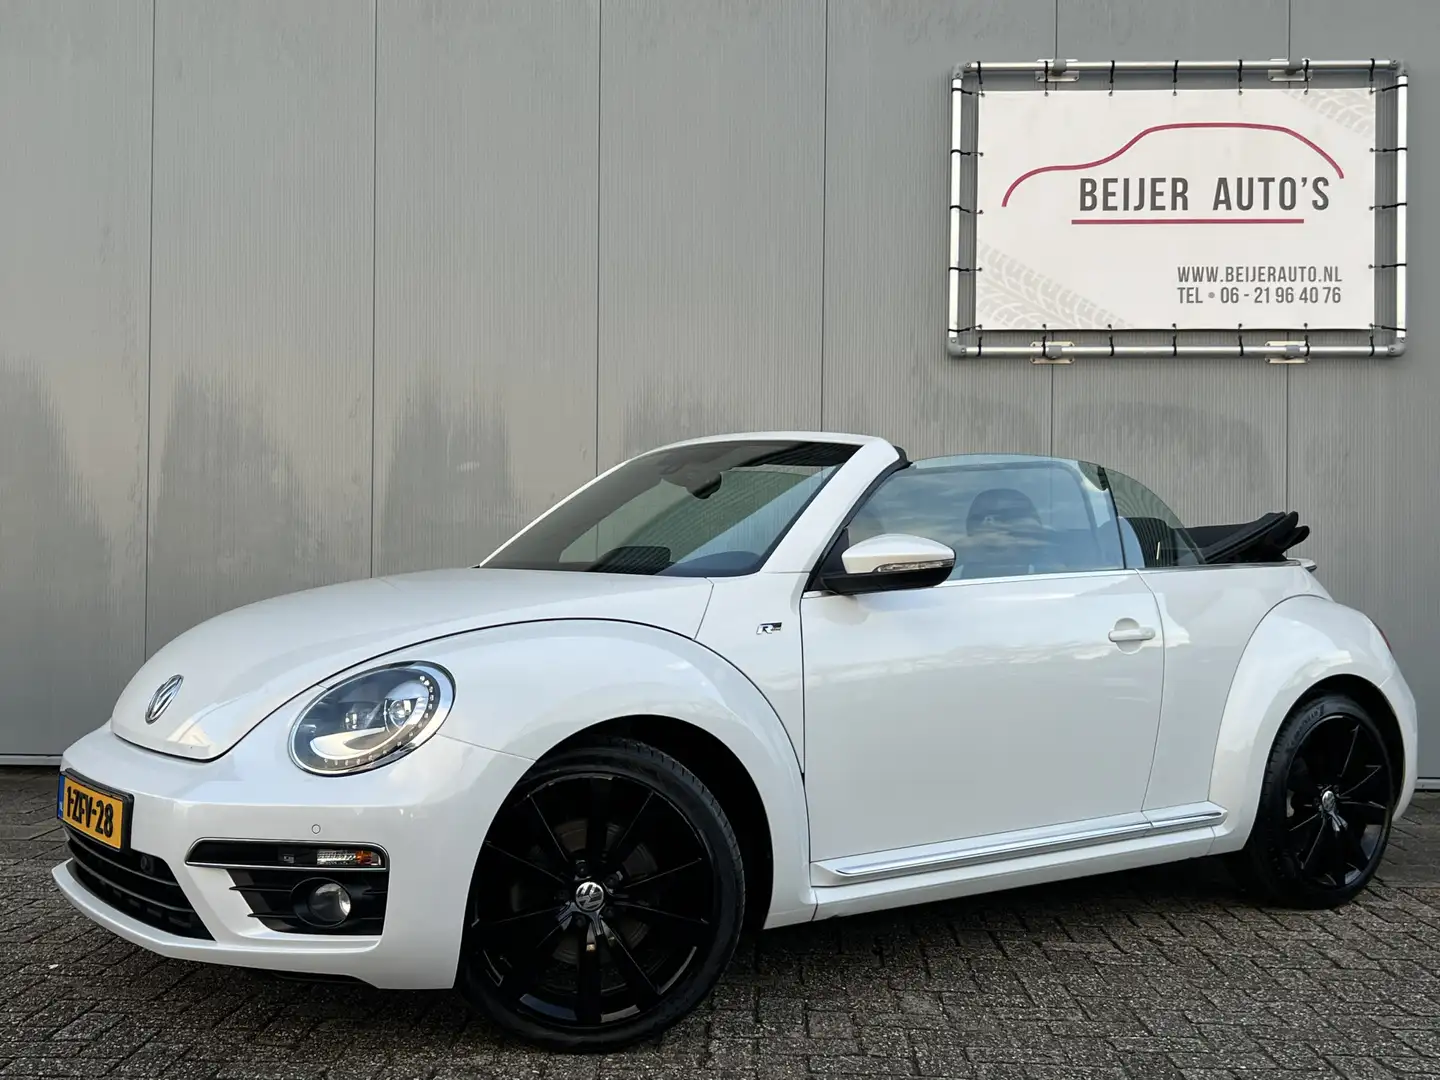 Volkswagen Beetle Cabriolet 1.4 TSI Sport Automaat R-Line/19inch. White - 1